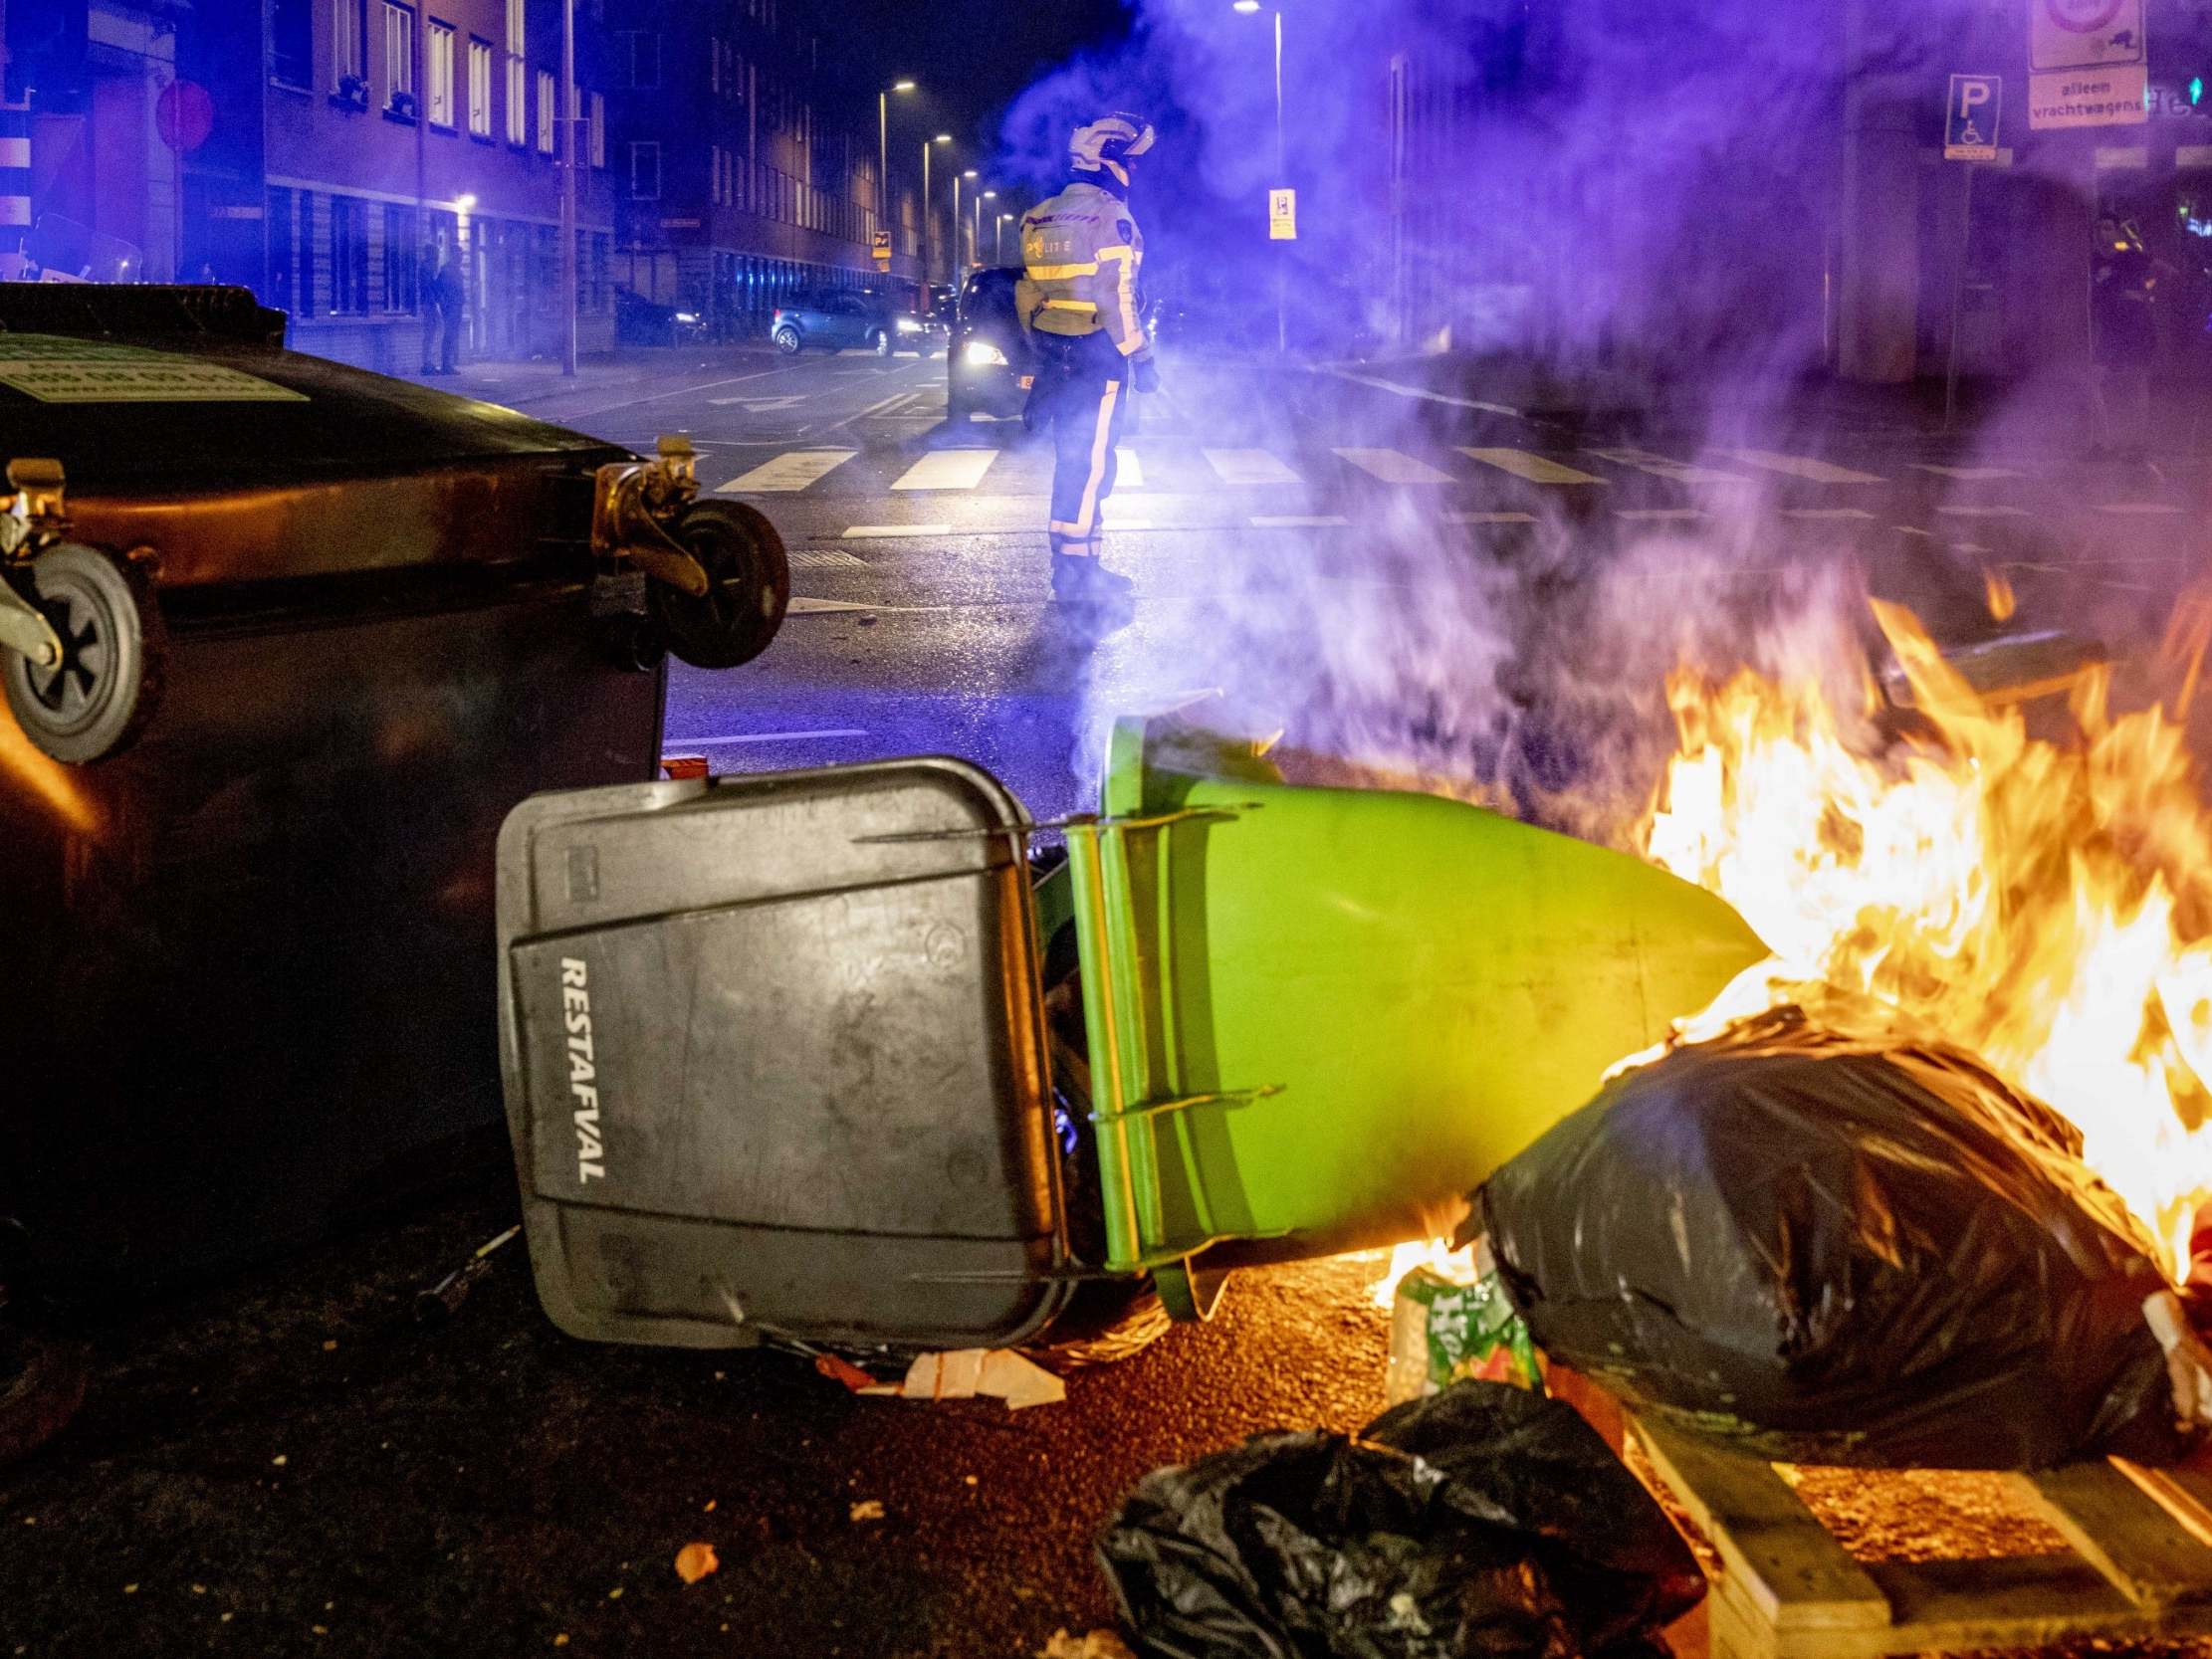 A view of a burning dumpster and other waste containers as a police officer keeps watch in the Schilderswijk neighborhood in The Hague, the Netherlands